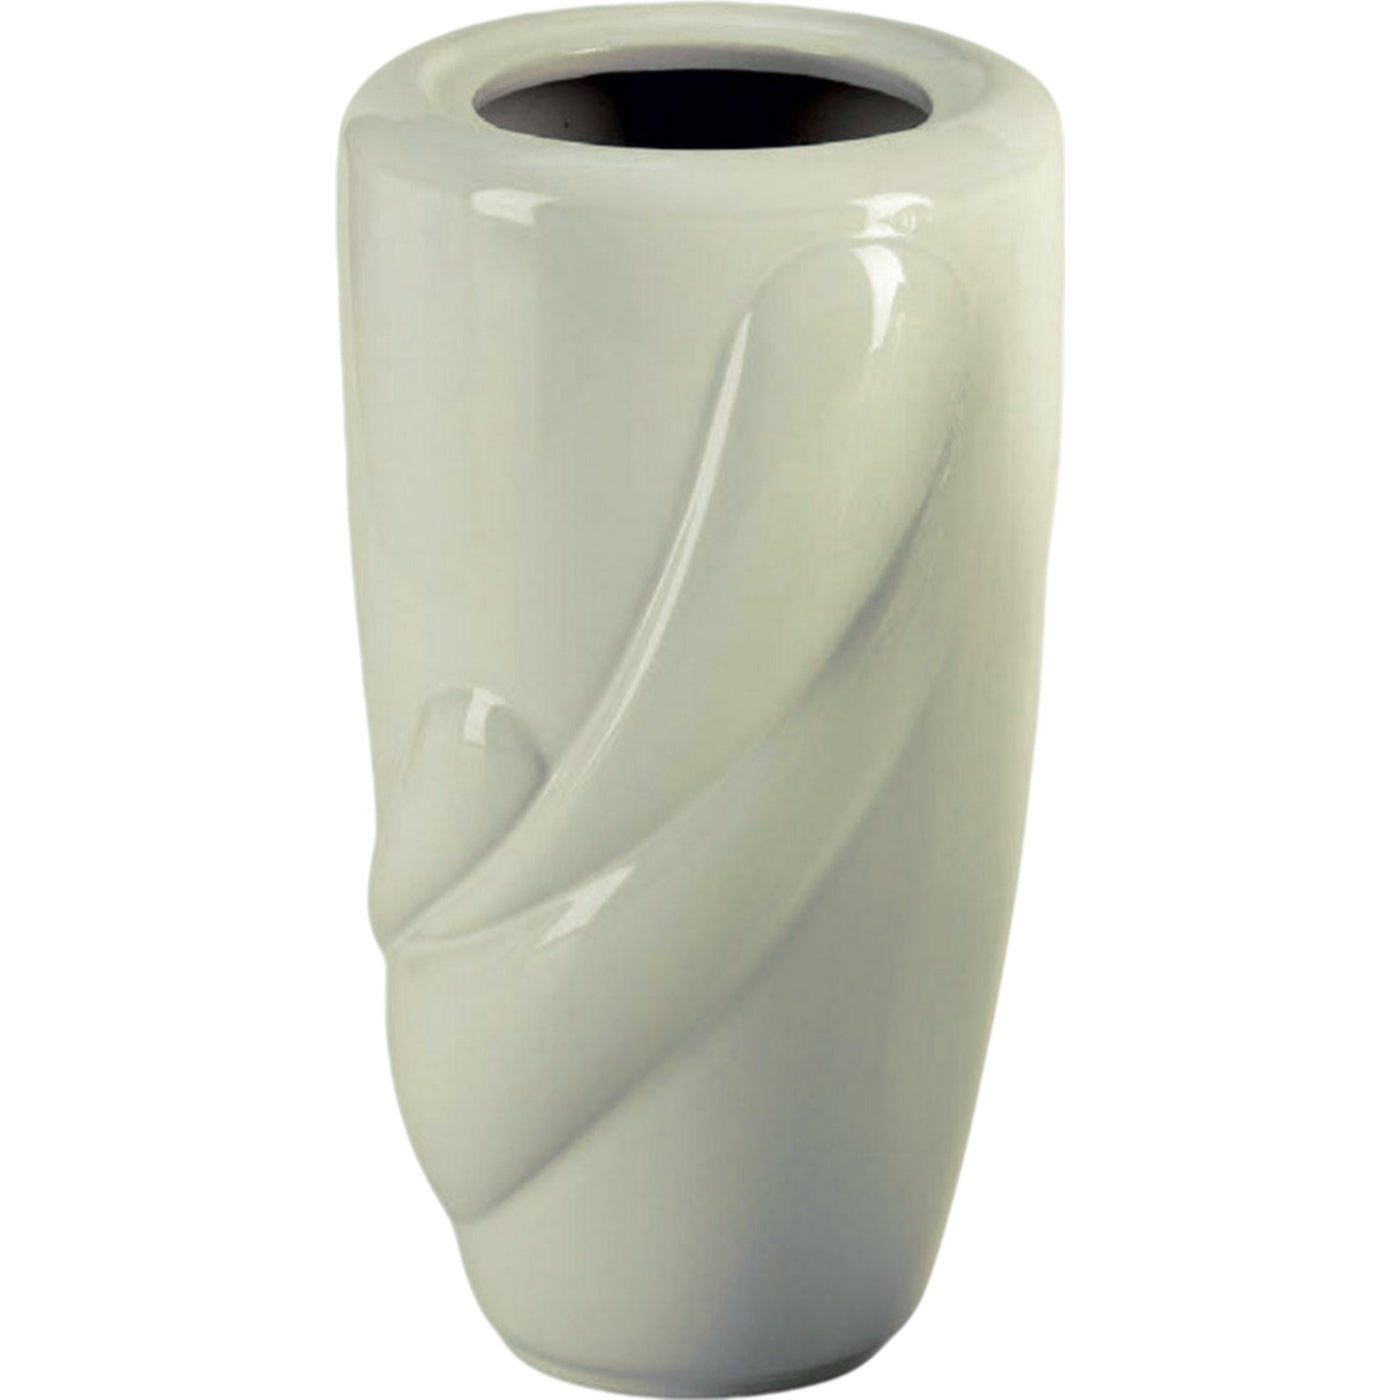 Grave vase Life ivory 21x13cm - 8.3x5.1in In ivory porcelain, ground attached LIF154T/A